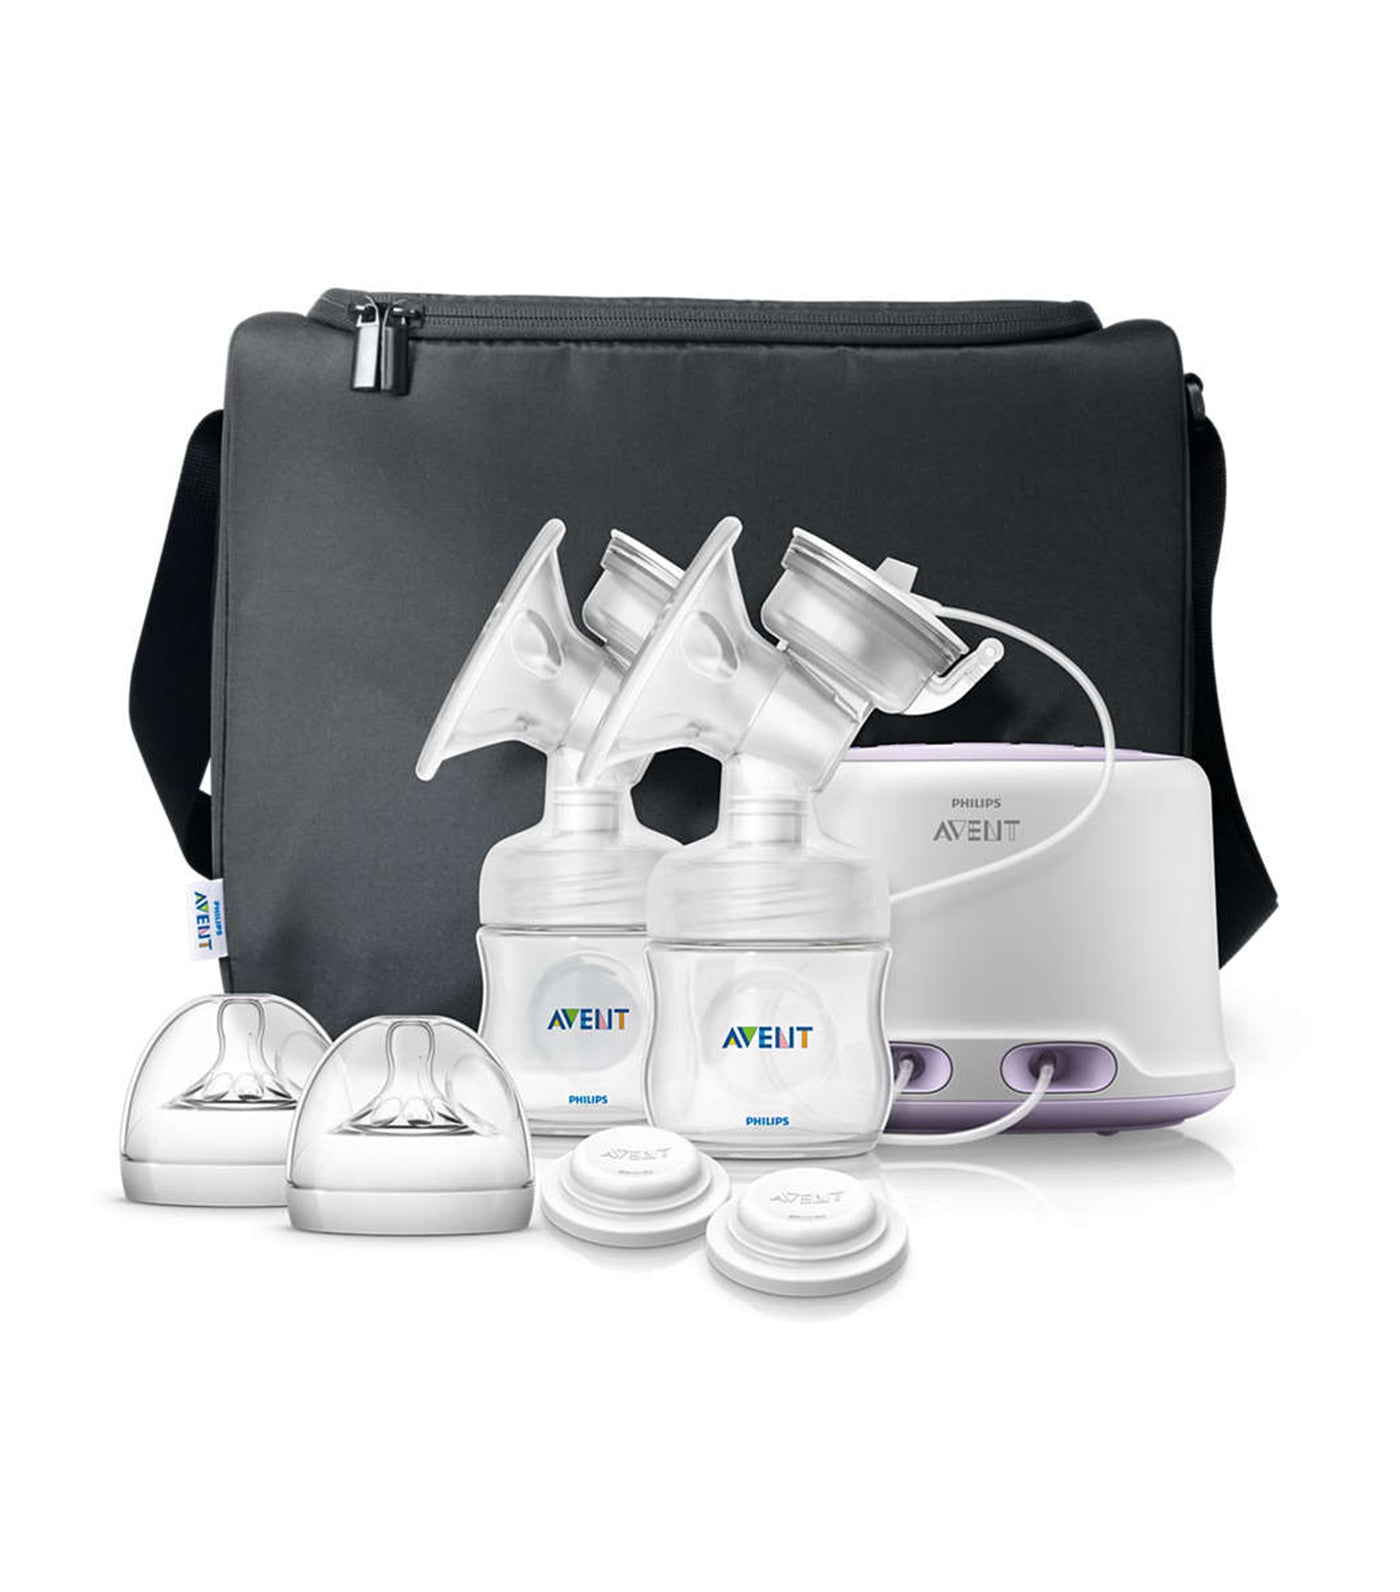 https://cdn.shopify.com/s/files/1/0032/3374/2946/products/philips_avent-2368421.jpg?v=1601287470&width=1400